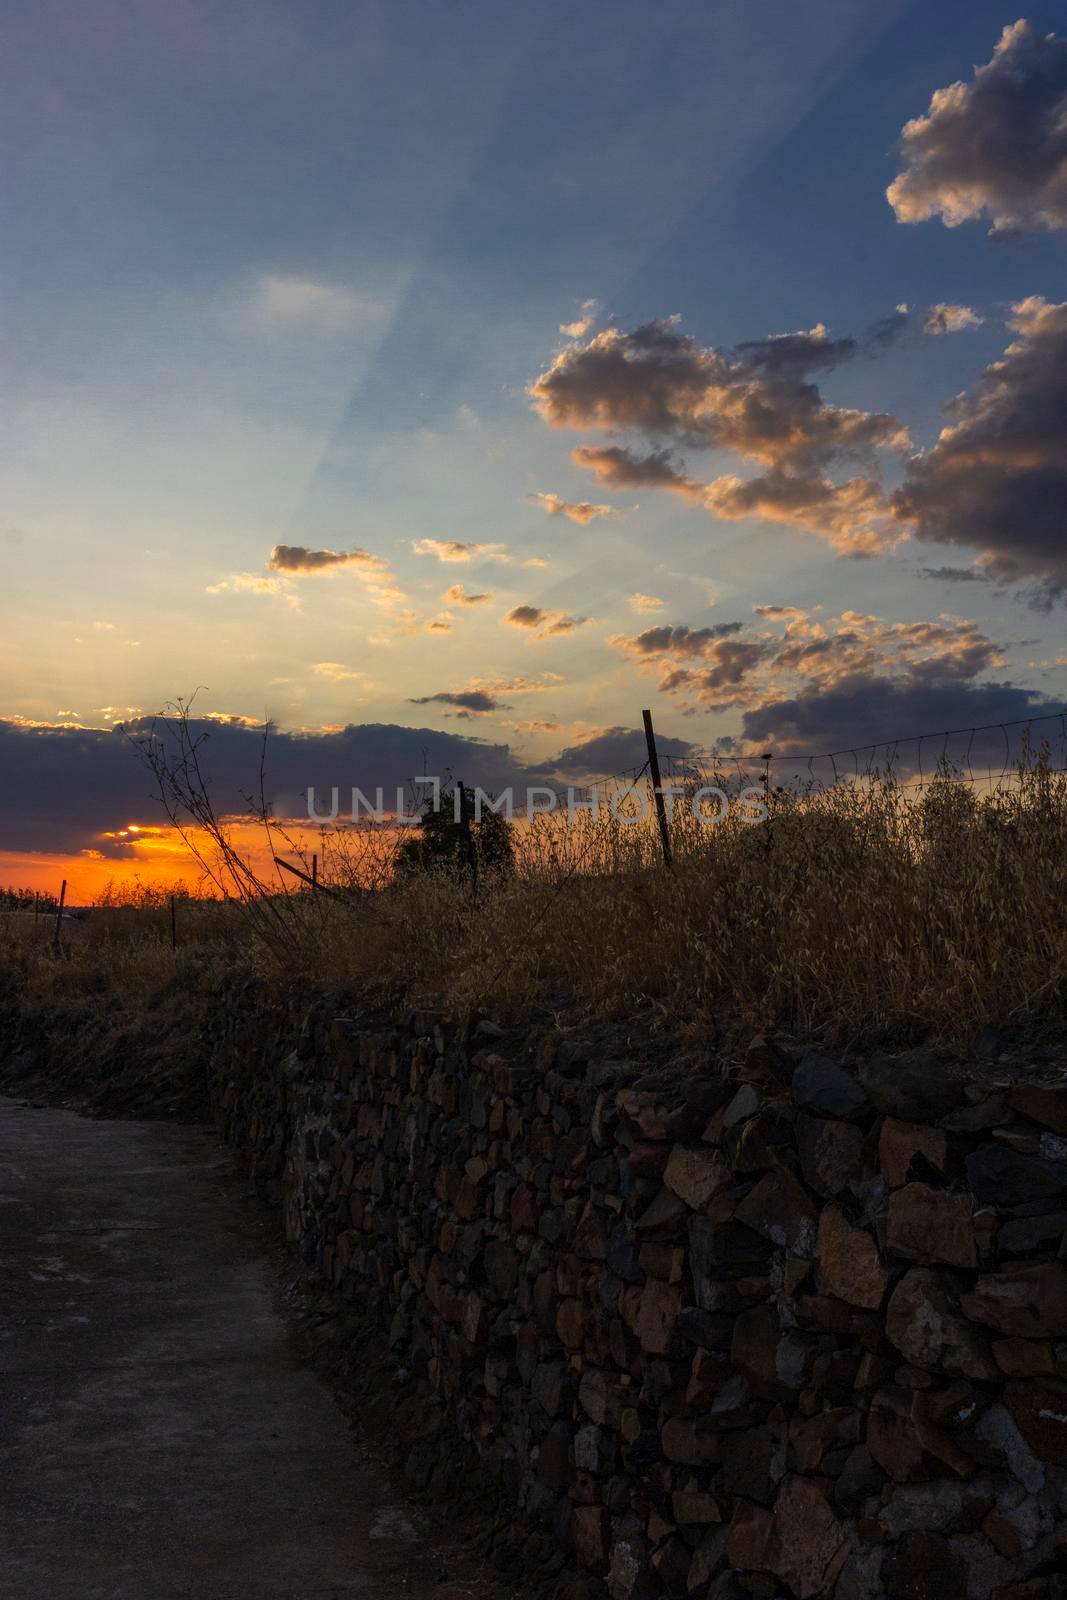 Stone wall in a field in Andalusia with a sunset sky by loopneo